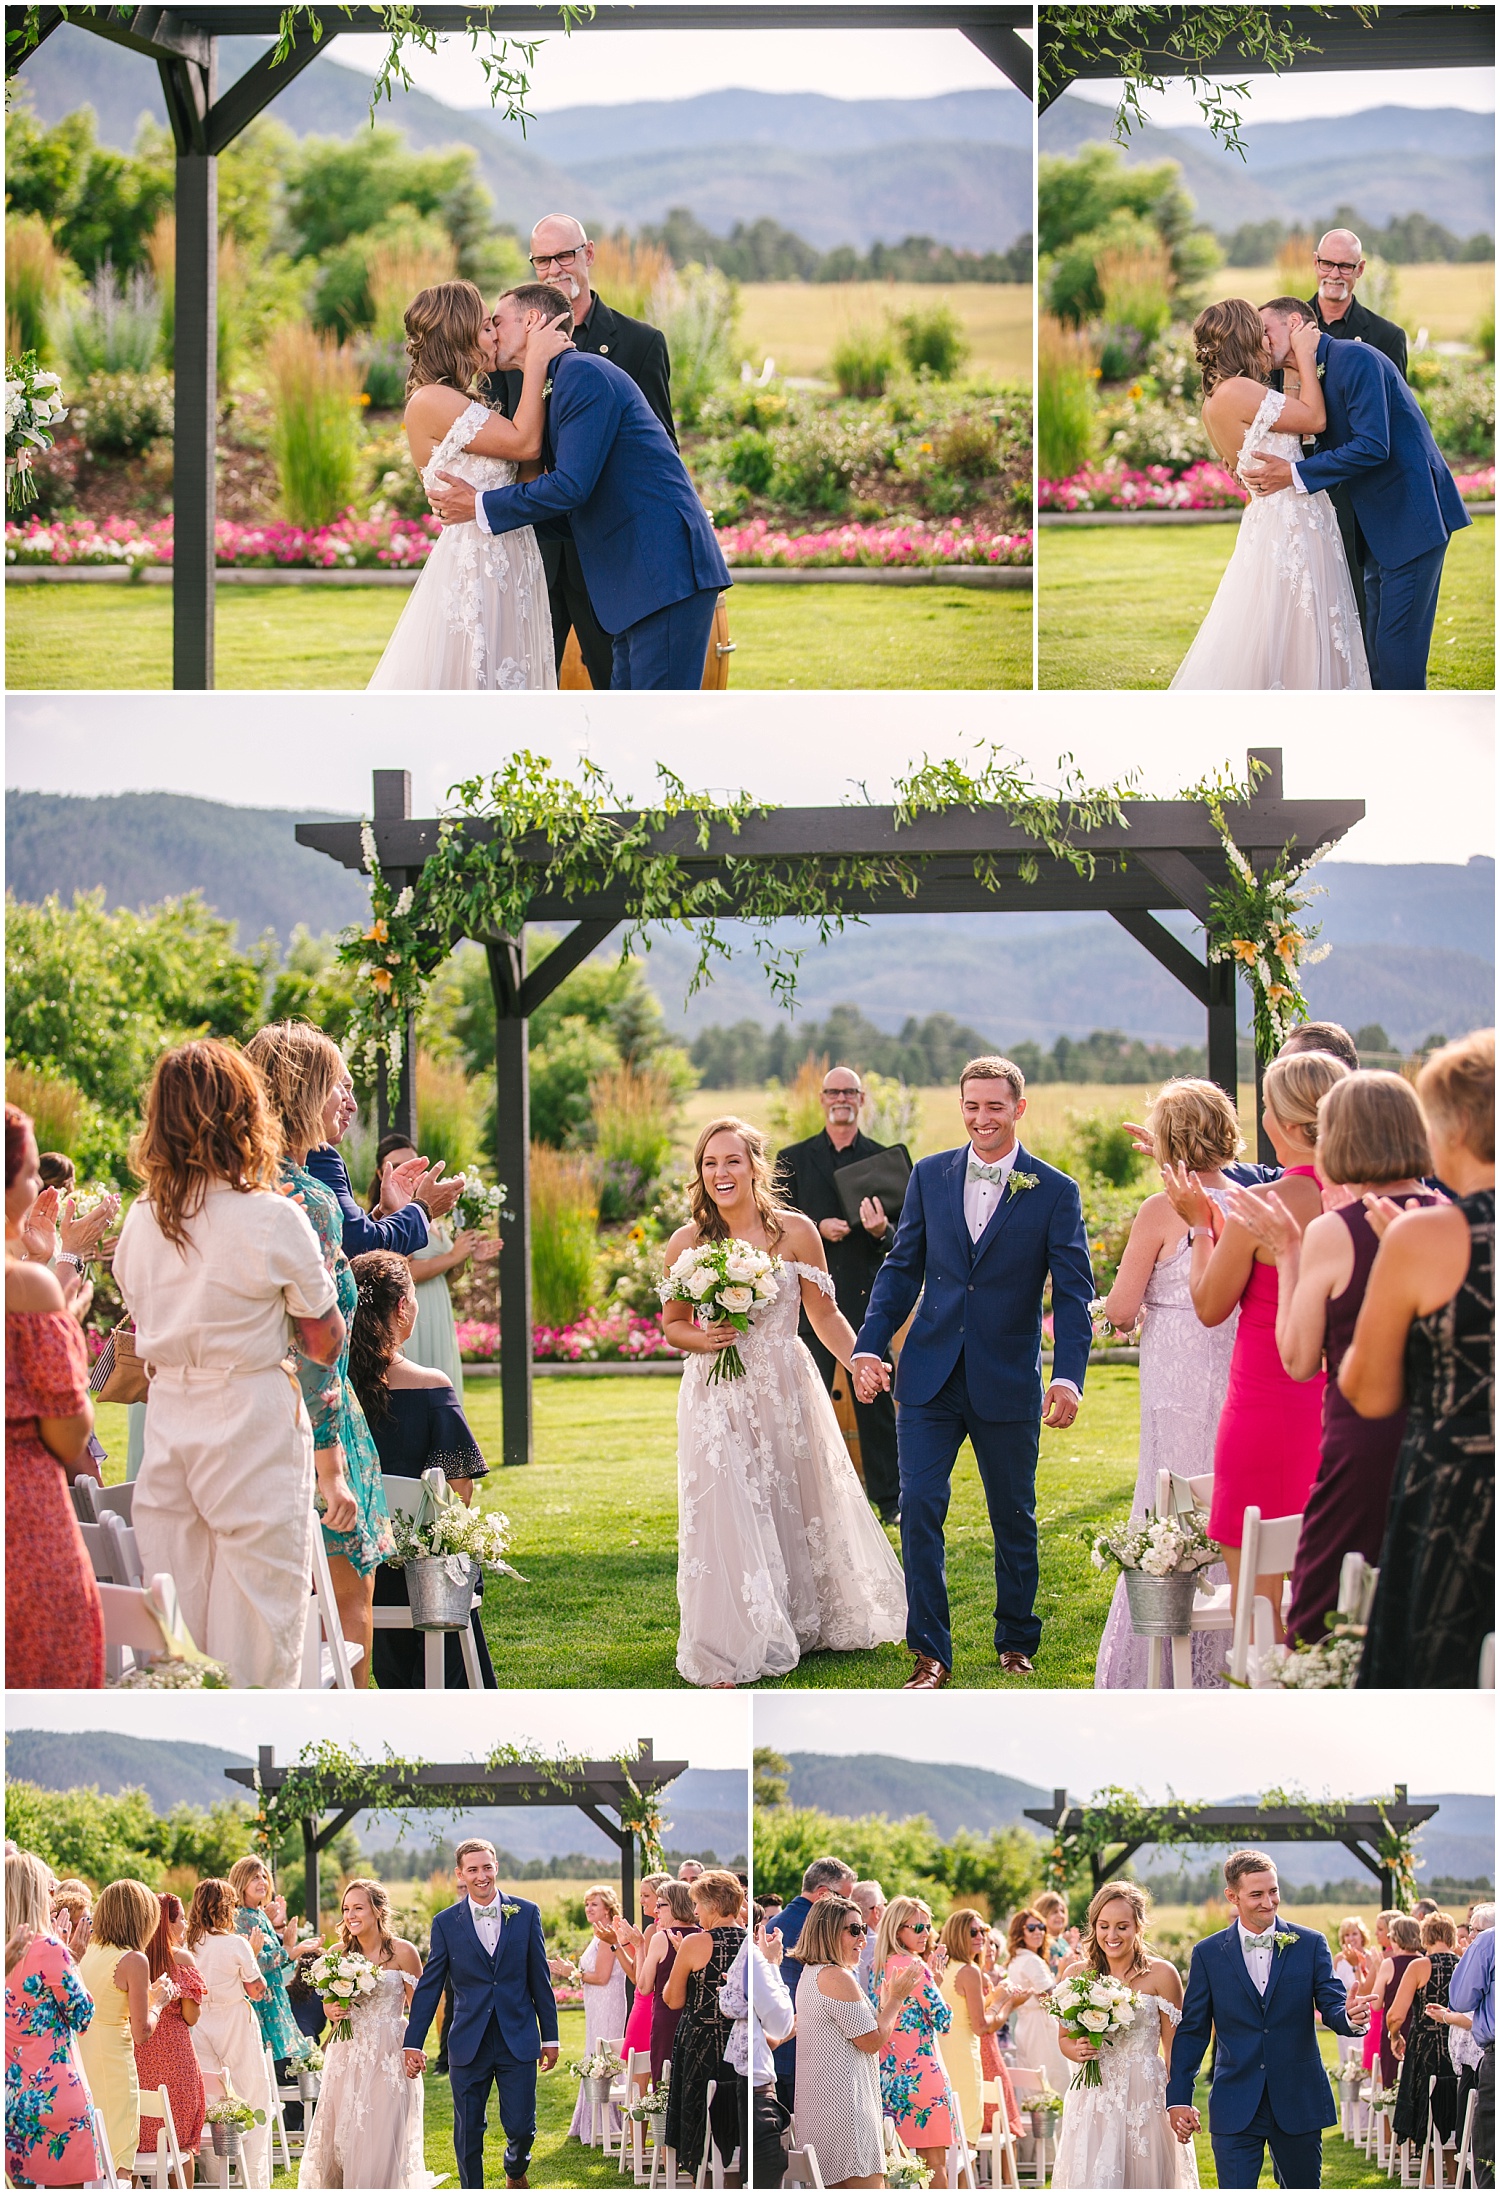 Crooked Willow Farms wedding ceremony overlooking the Rocky Mountains in Larkspur Colorado